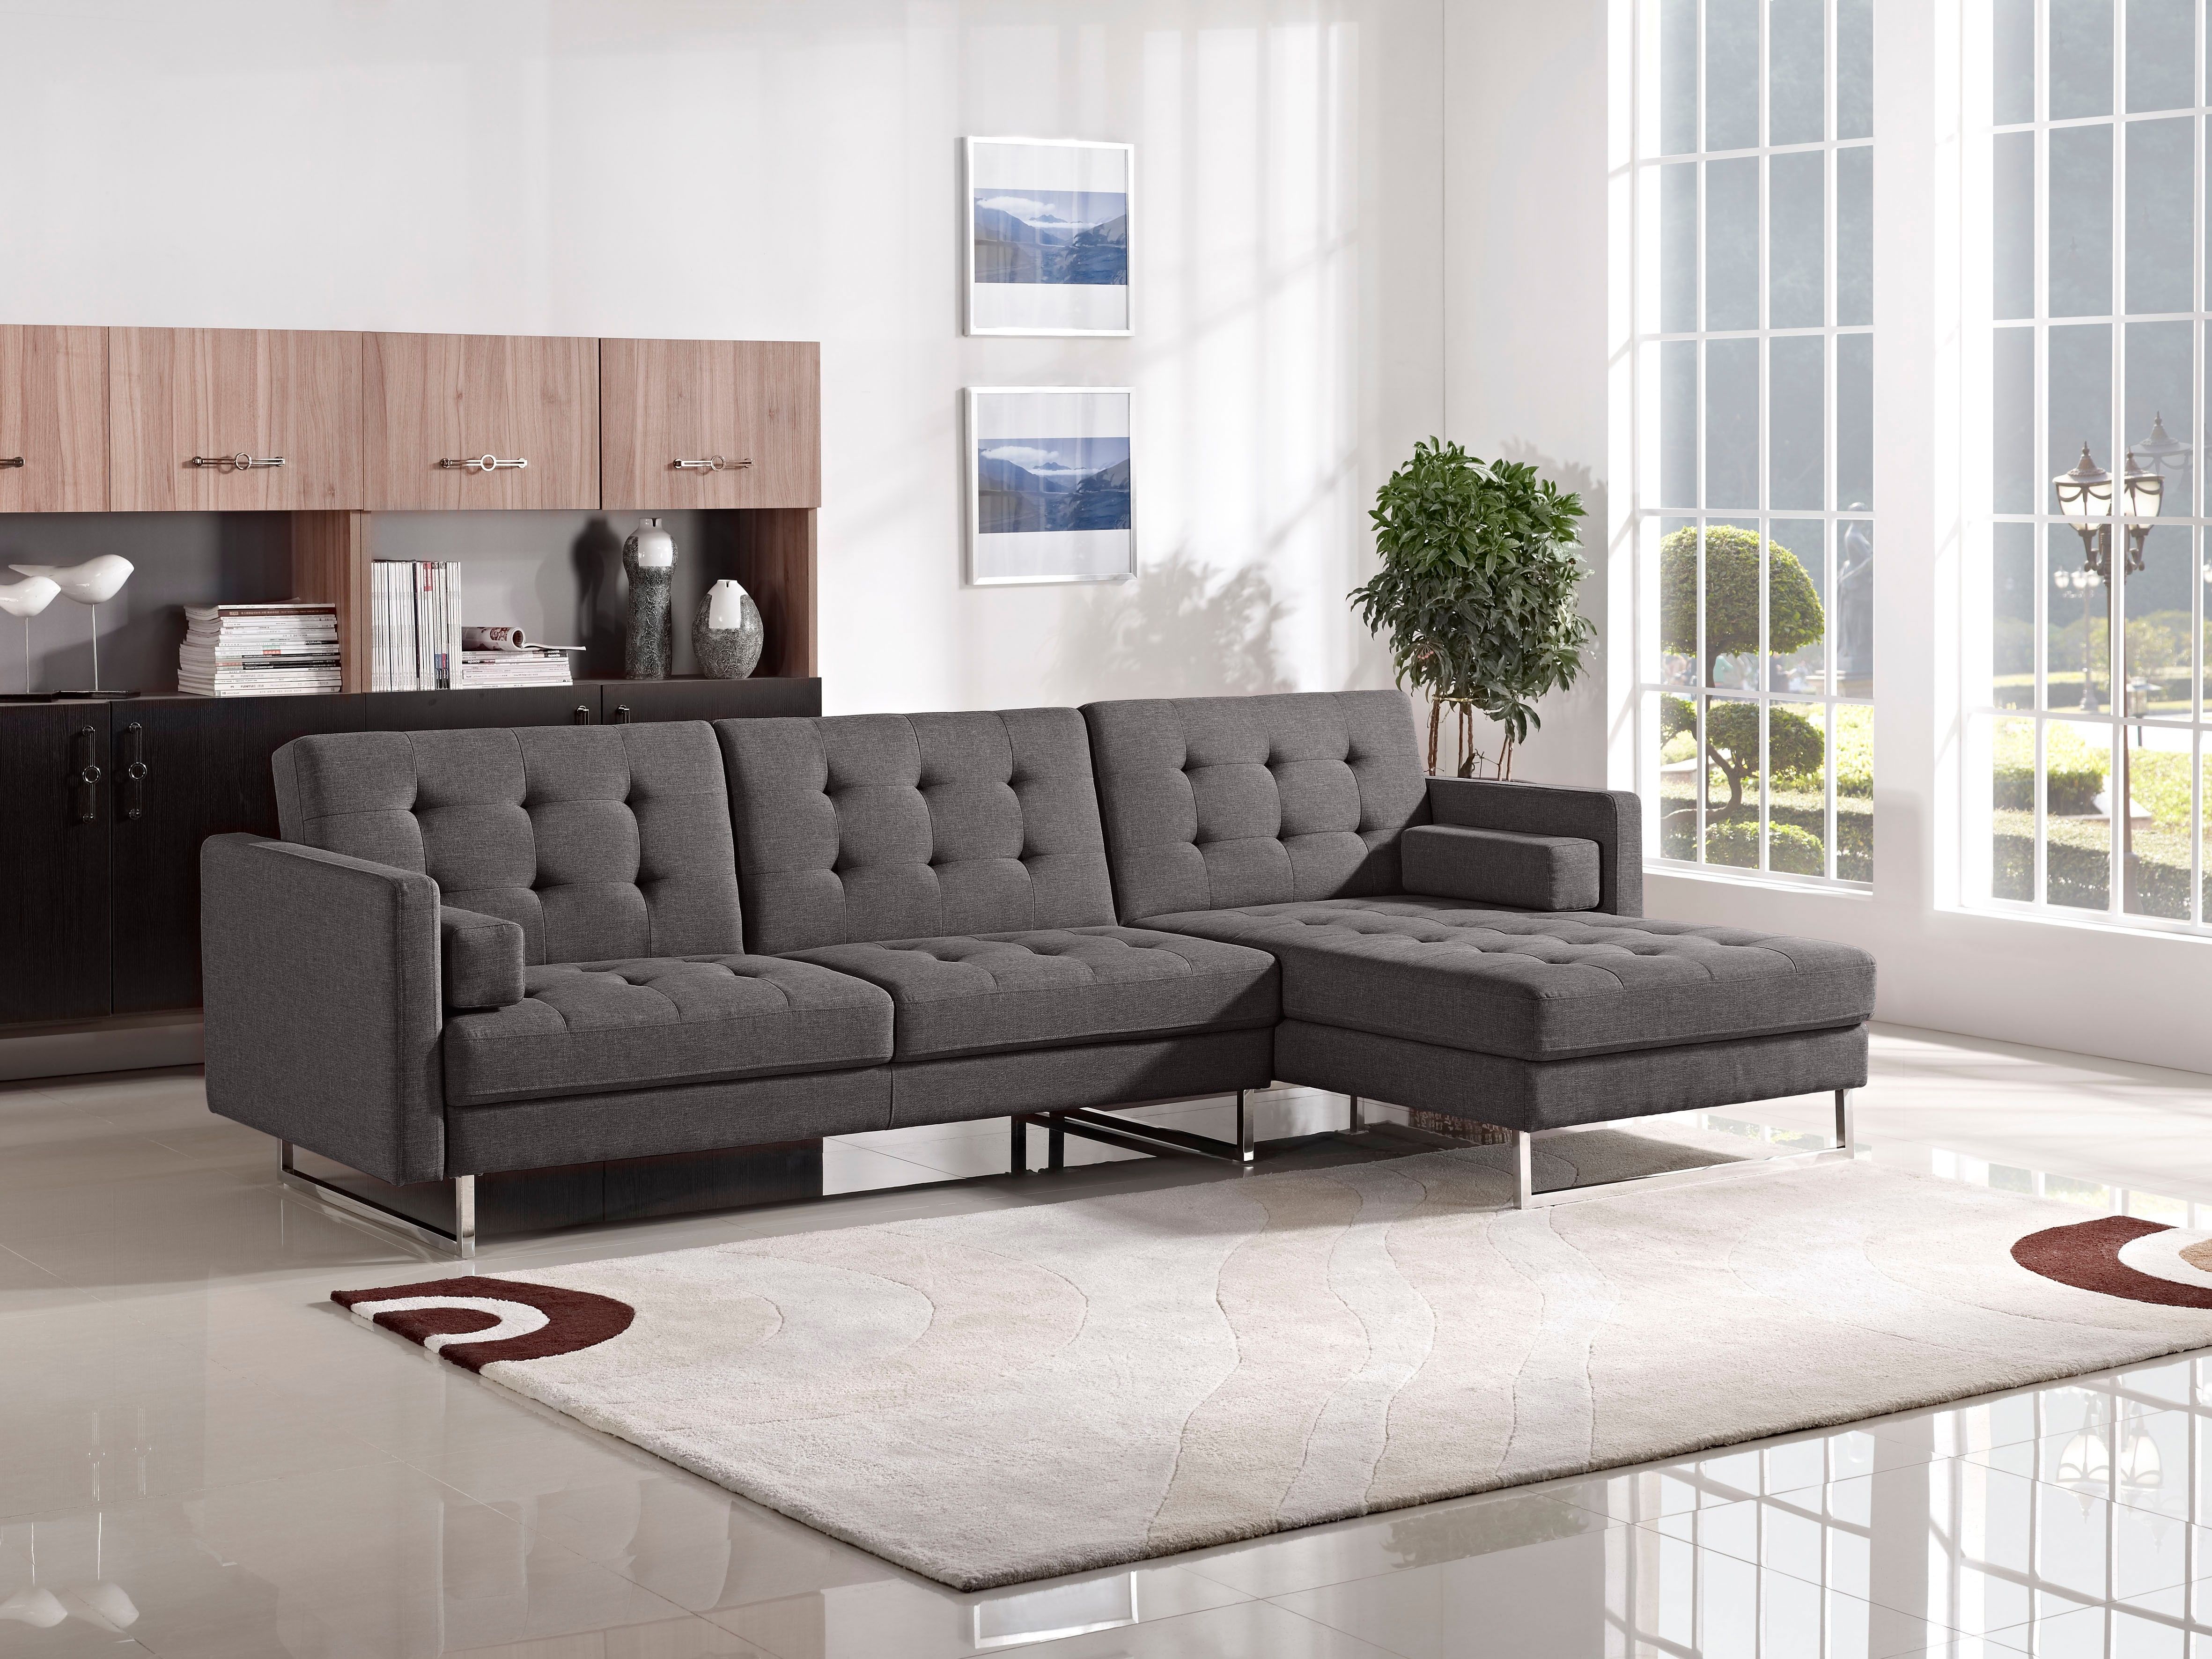 Tufted Sectional Sofa With Chaise Cleanupflorida Pertaining To Affordable Tufted Sofa 